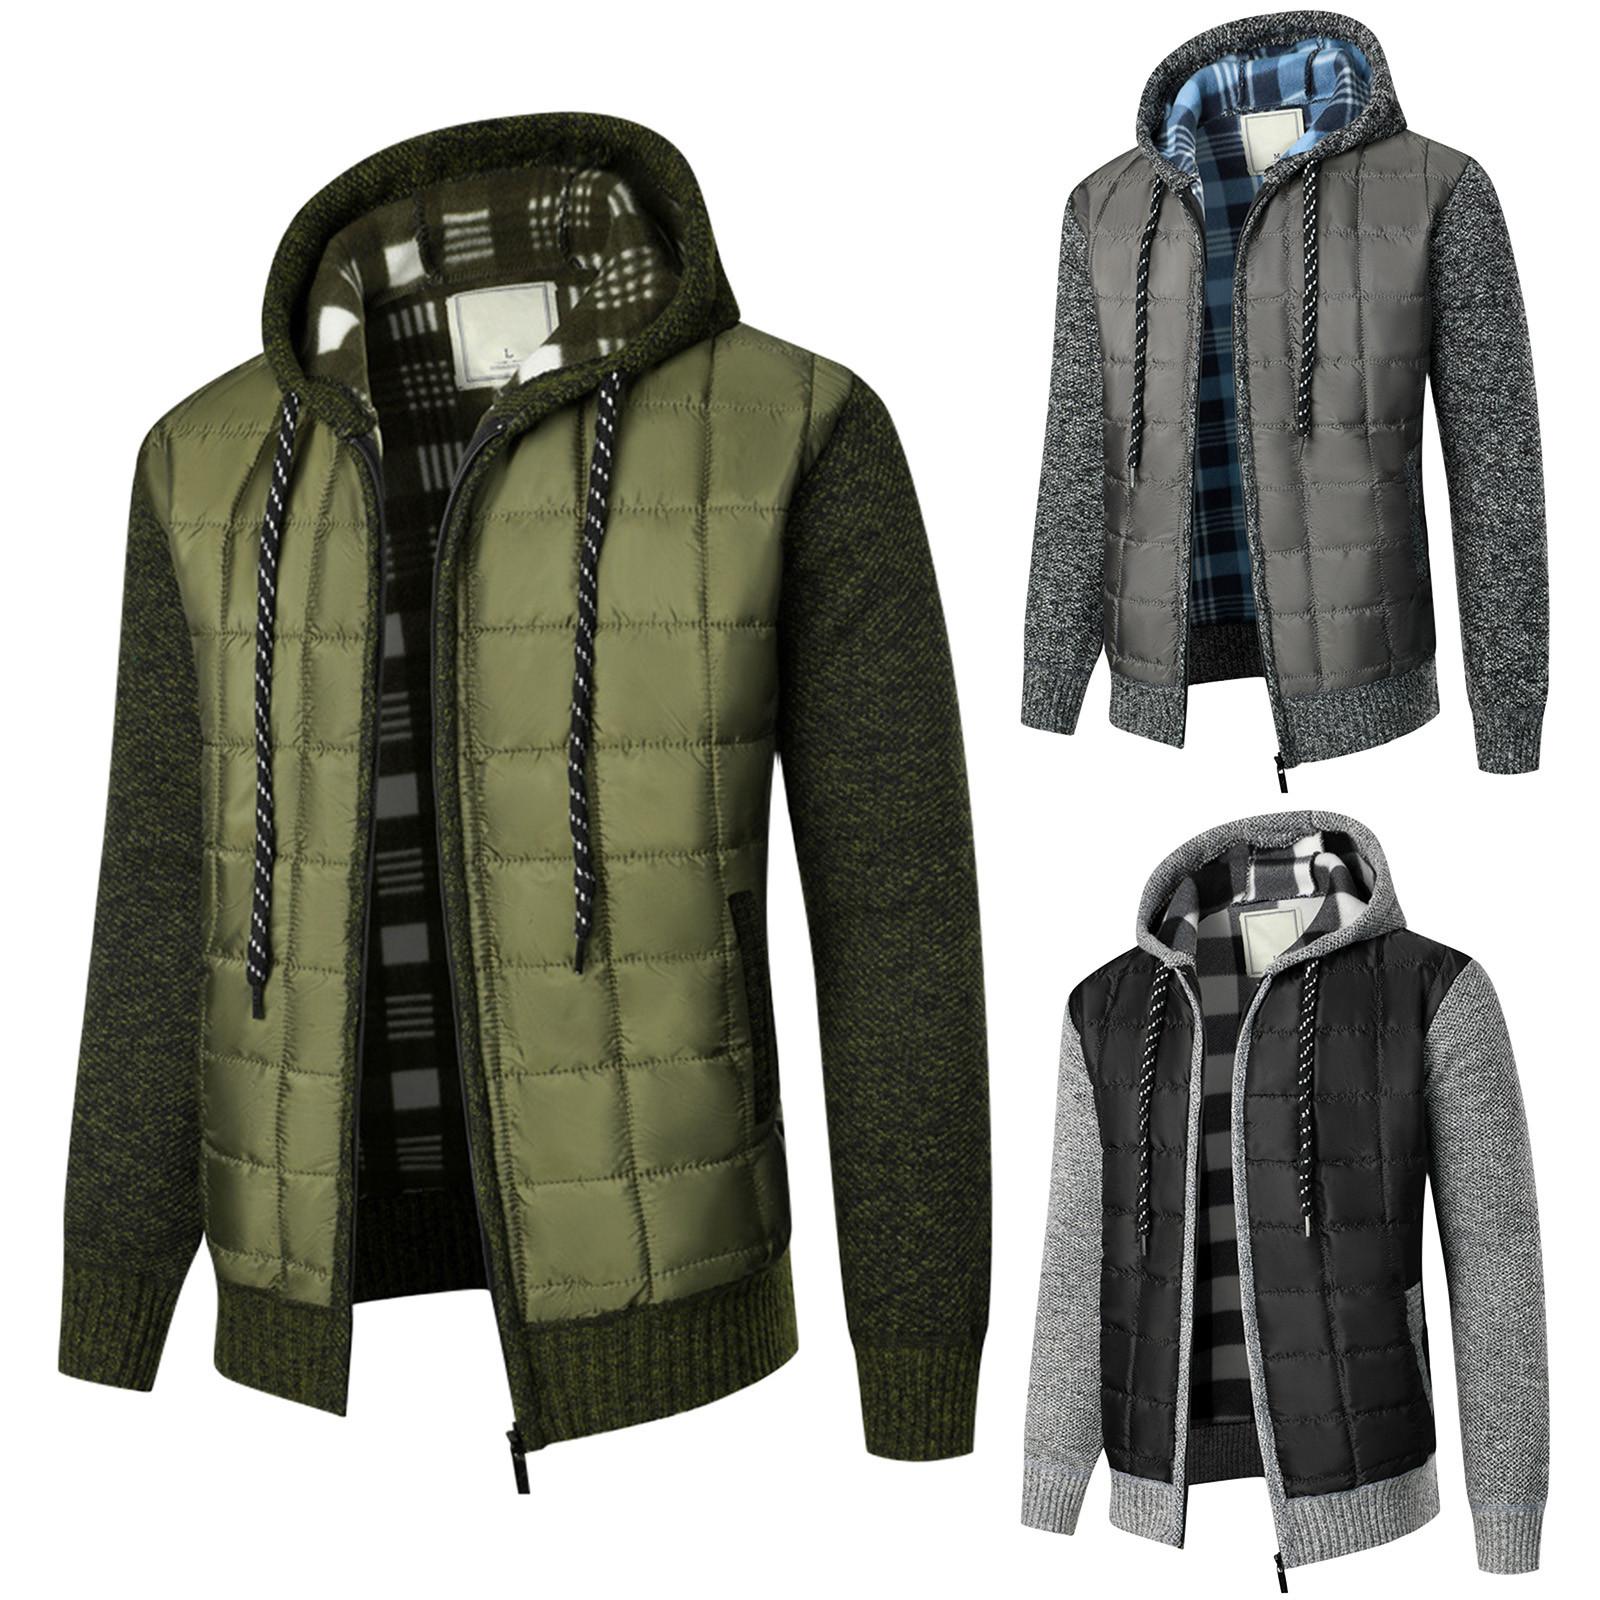 Wiwily Men's Hooded Plush Plaid Knitting Drawstring Coat Sweater Warm Solid Color Jackets Tops